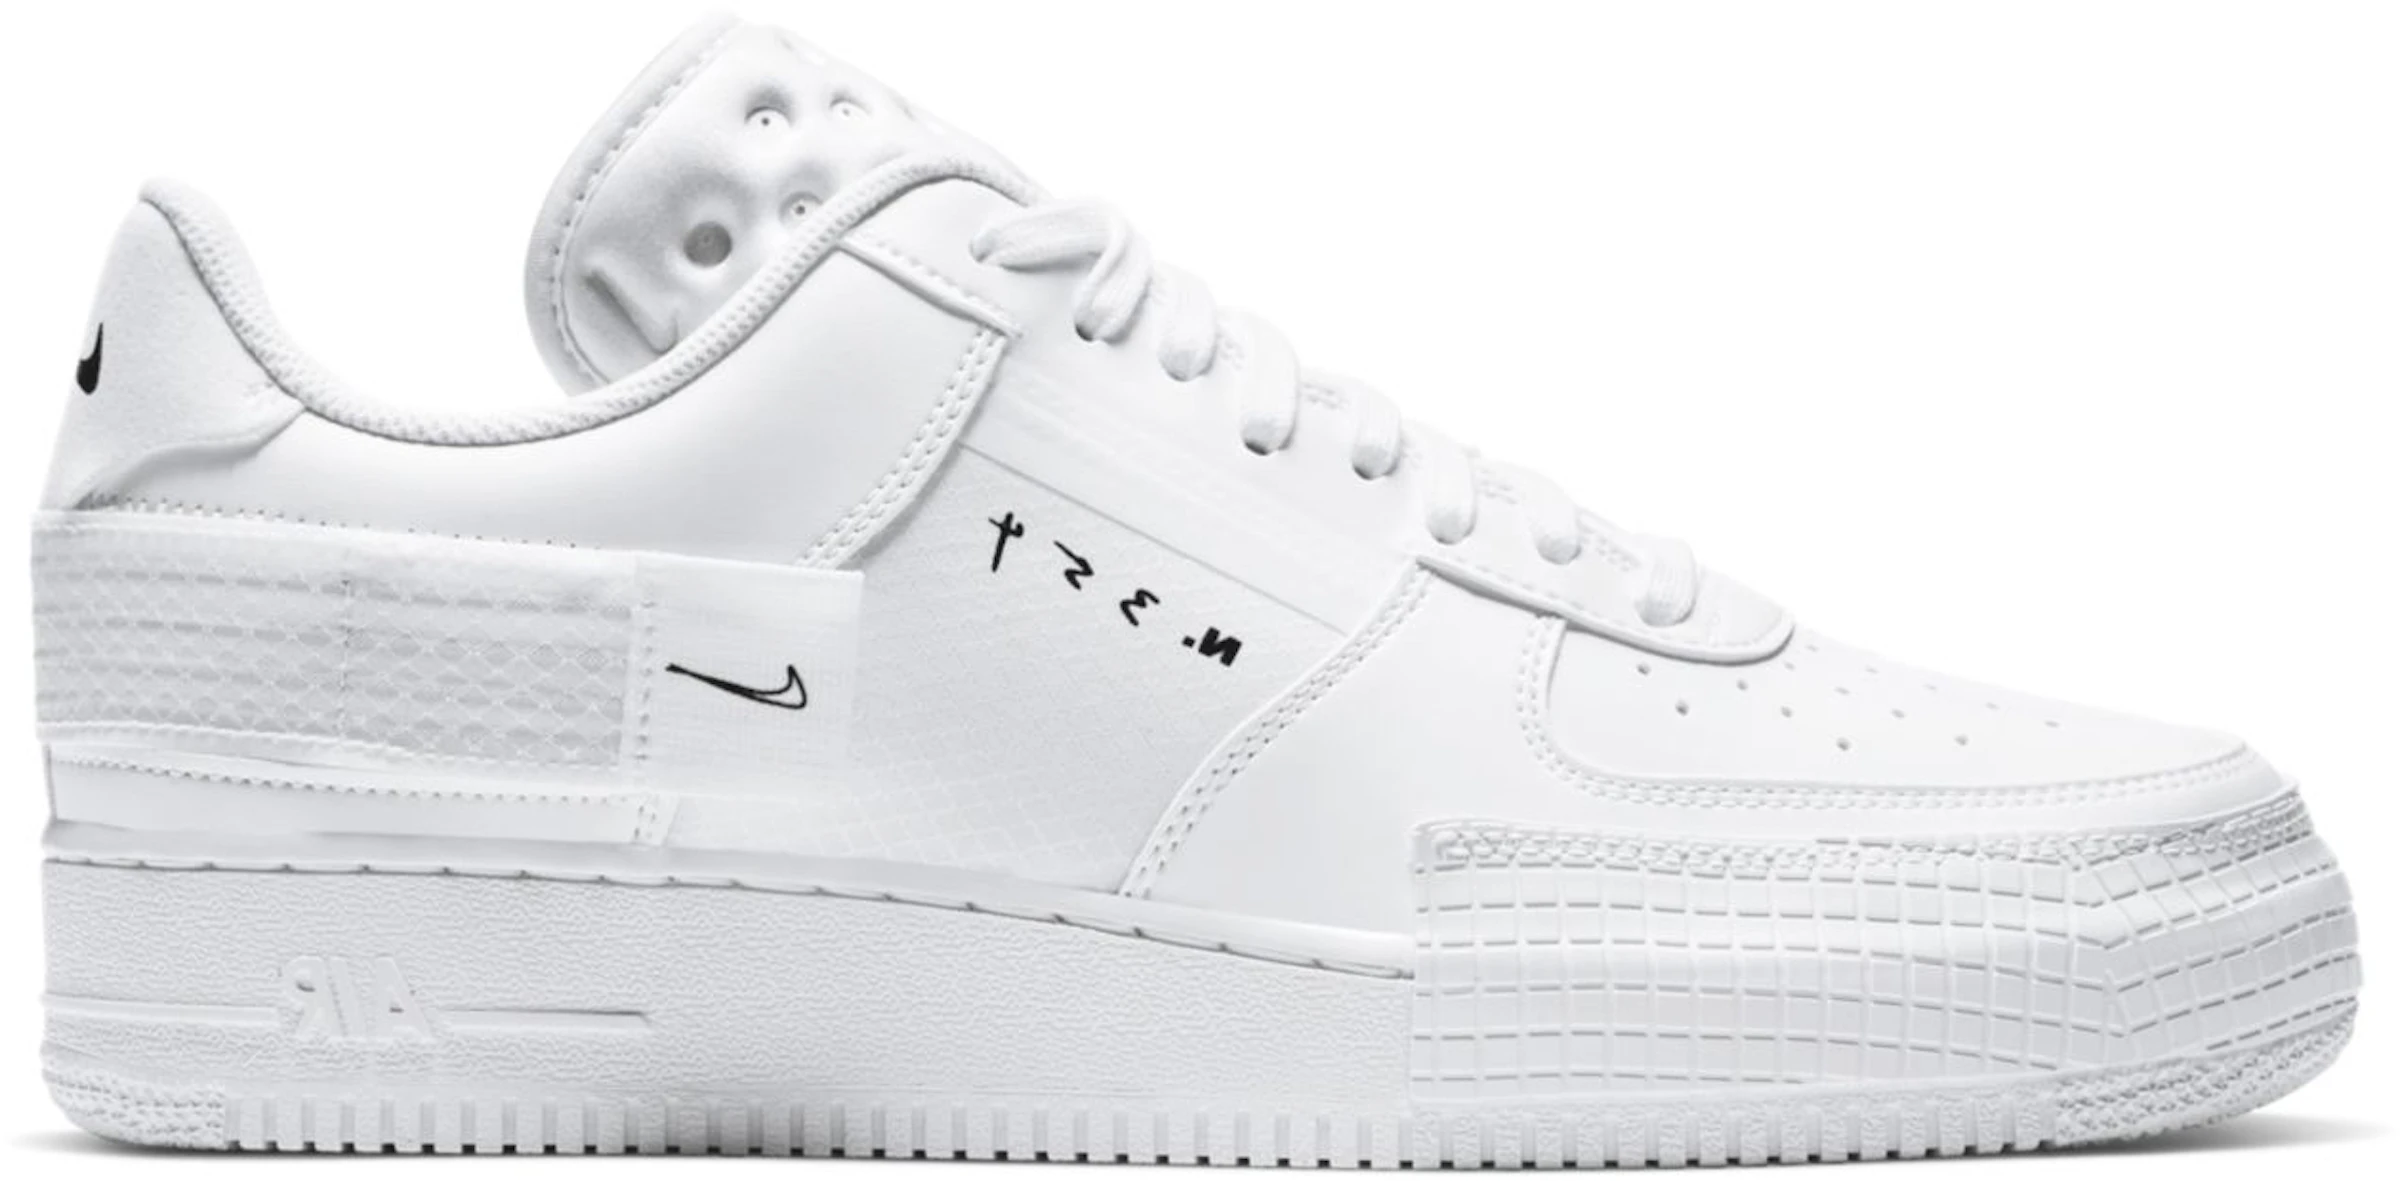 Afwijking afstuderen band Nike Air Force 1 Low Type 2 Triple White - CT2584-100 - US